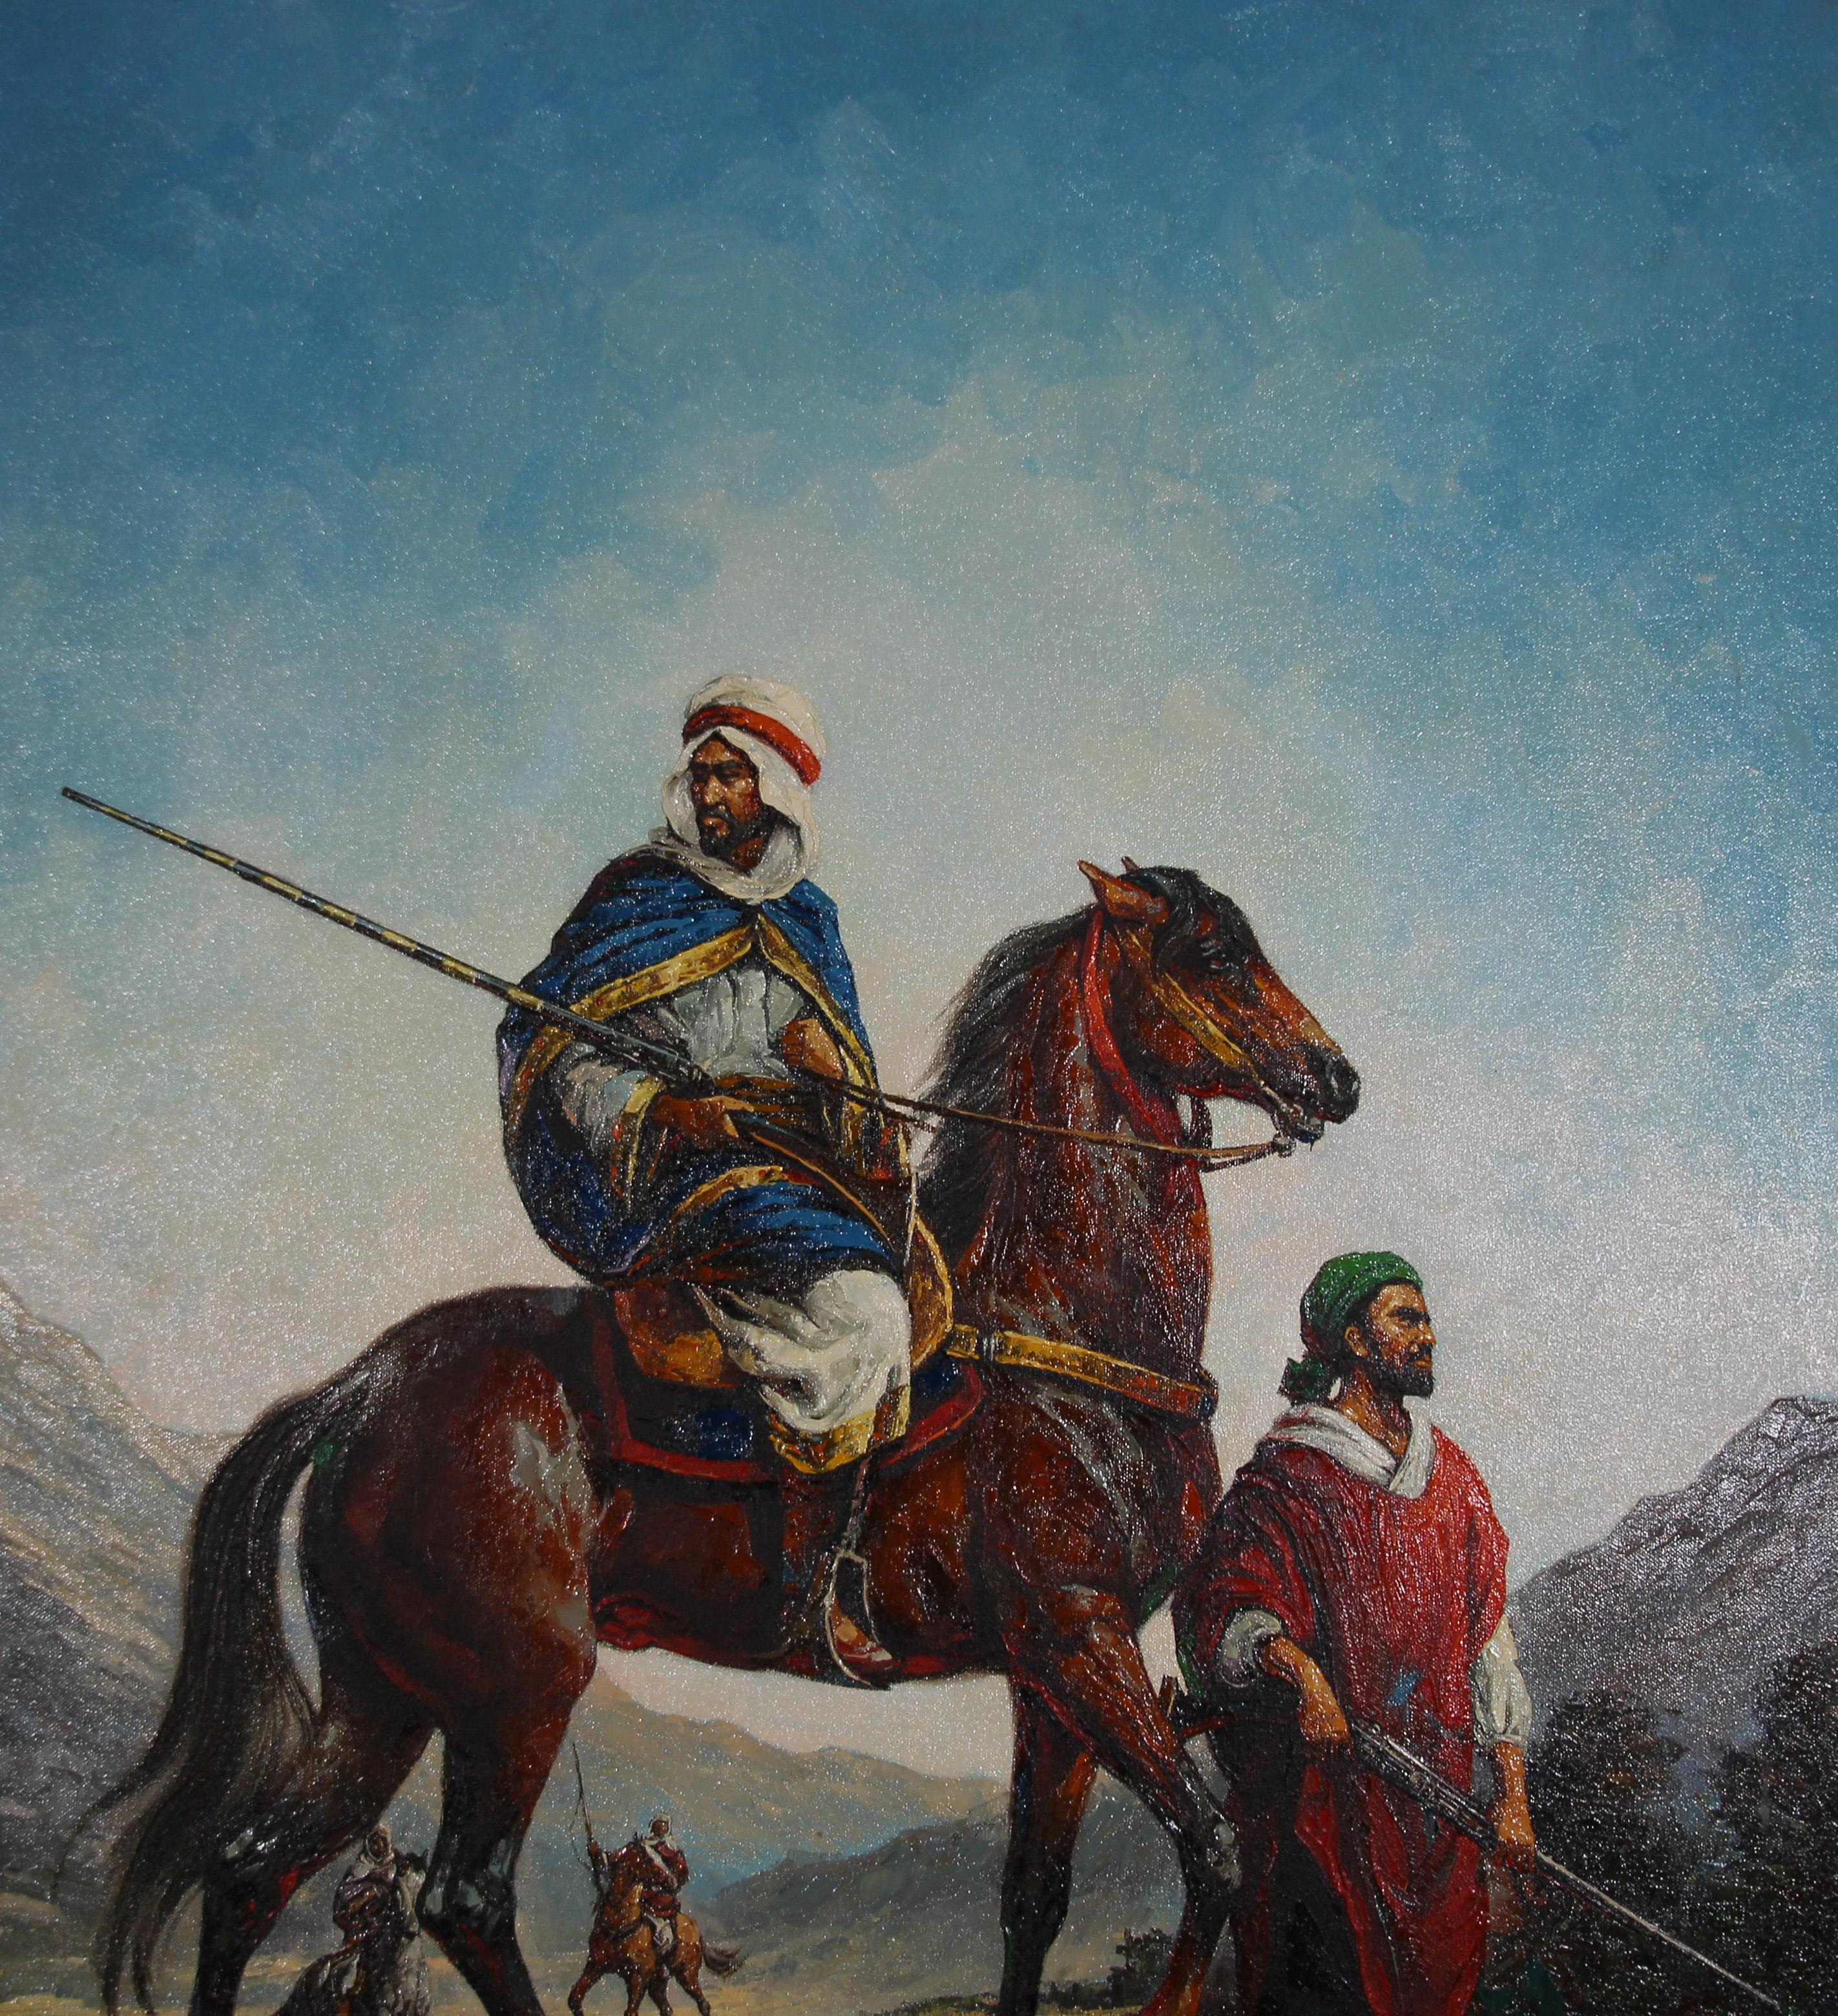 Moroccan Orientalist Oil Painting of Men on Horses In Good Condition For Sale In North Hollywood, CA